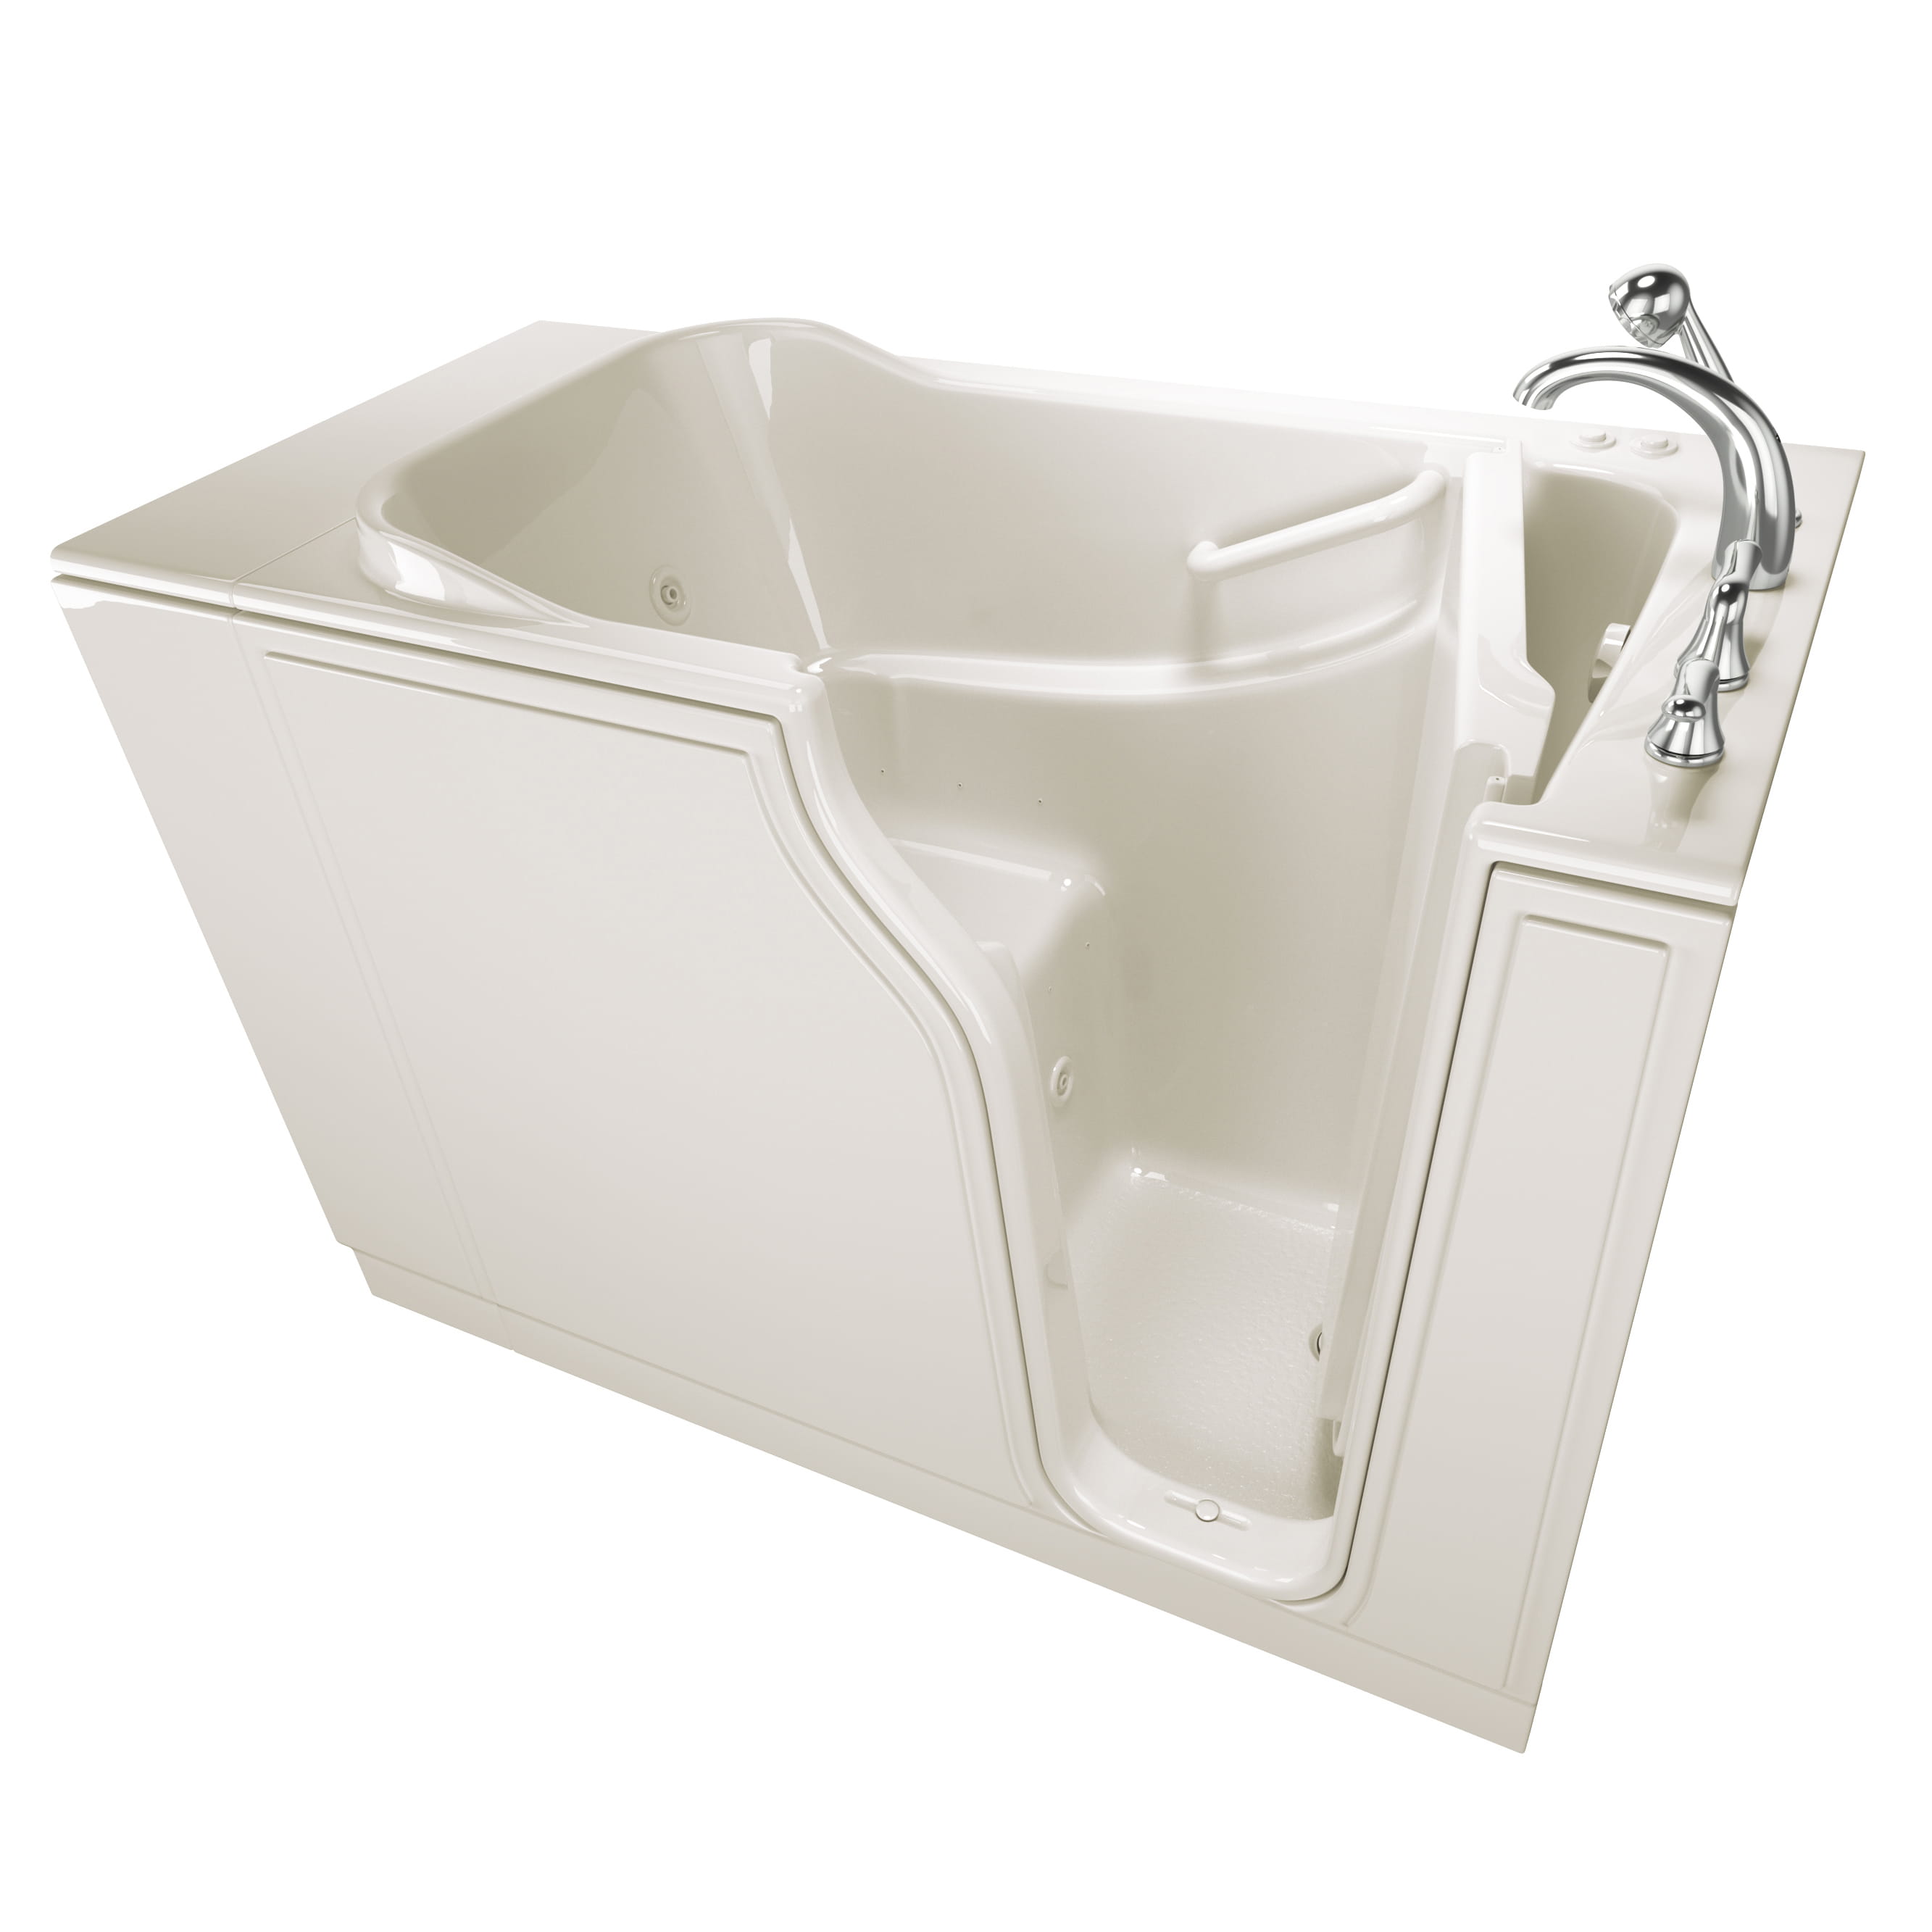 Gelcoat Entry Series 52 x 30 Inch Walk In Tub With Combination Air Spa and Whirlpool Systems - Right Hand Drain With Faucet BISCUIT